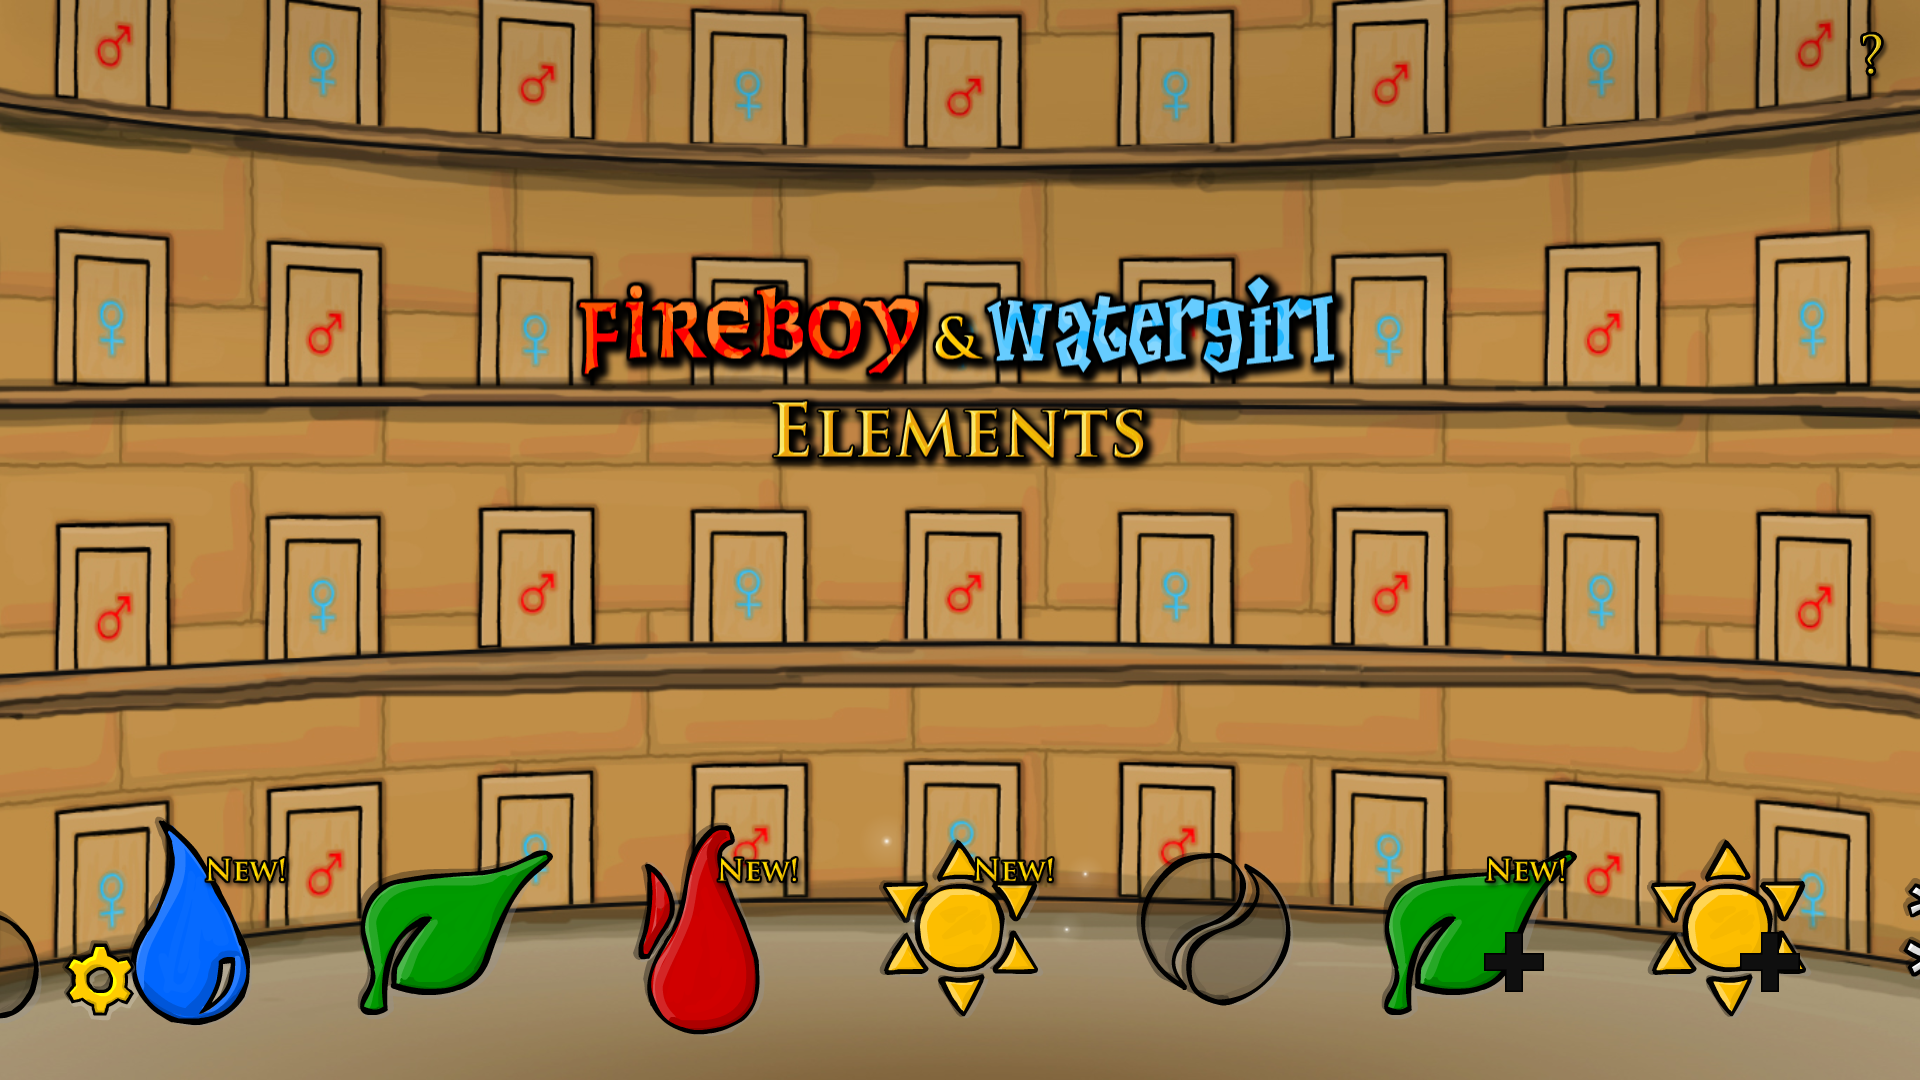 Fireboy And Watergirl [Level 1 FOREST TEMPLE] 